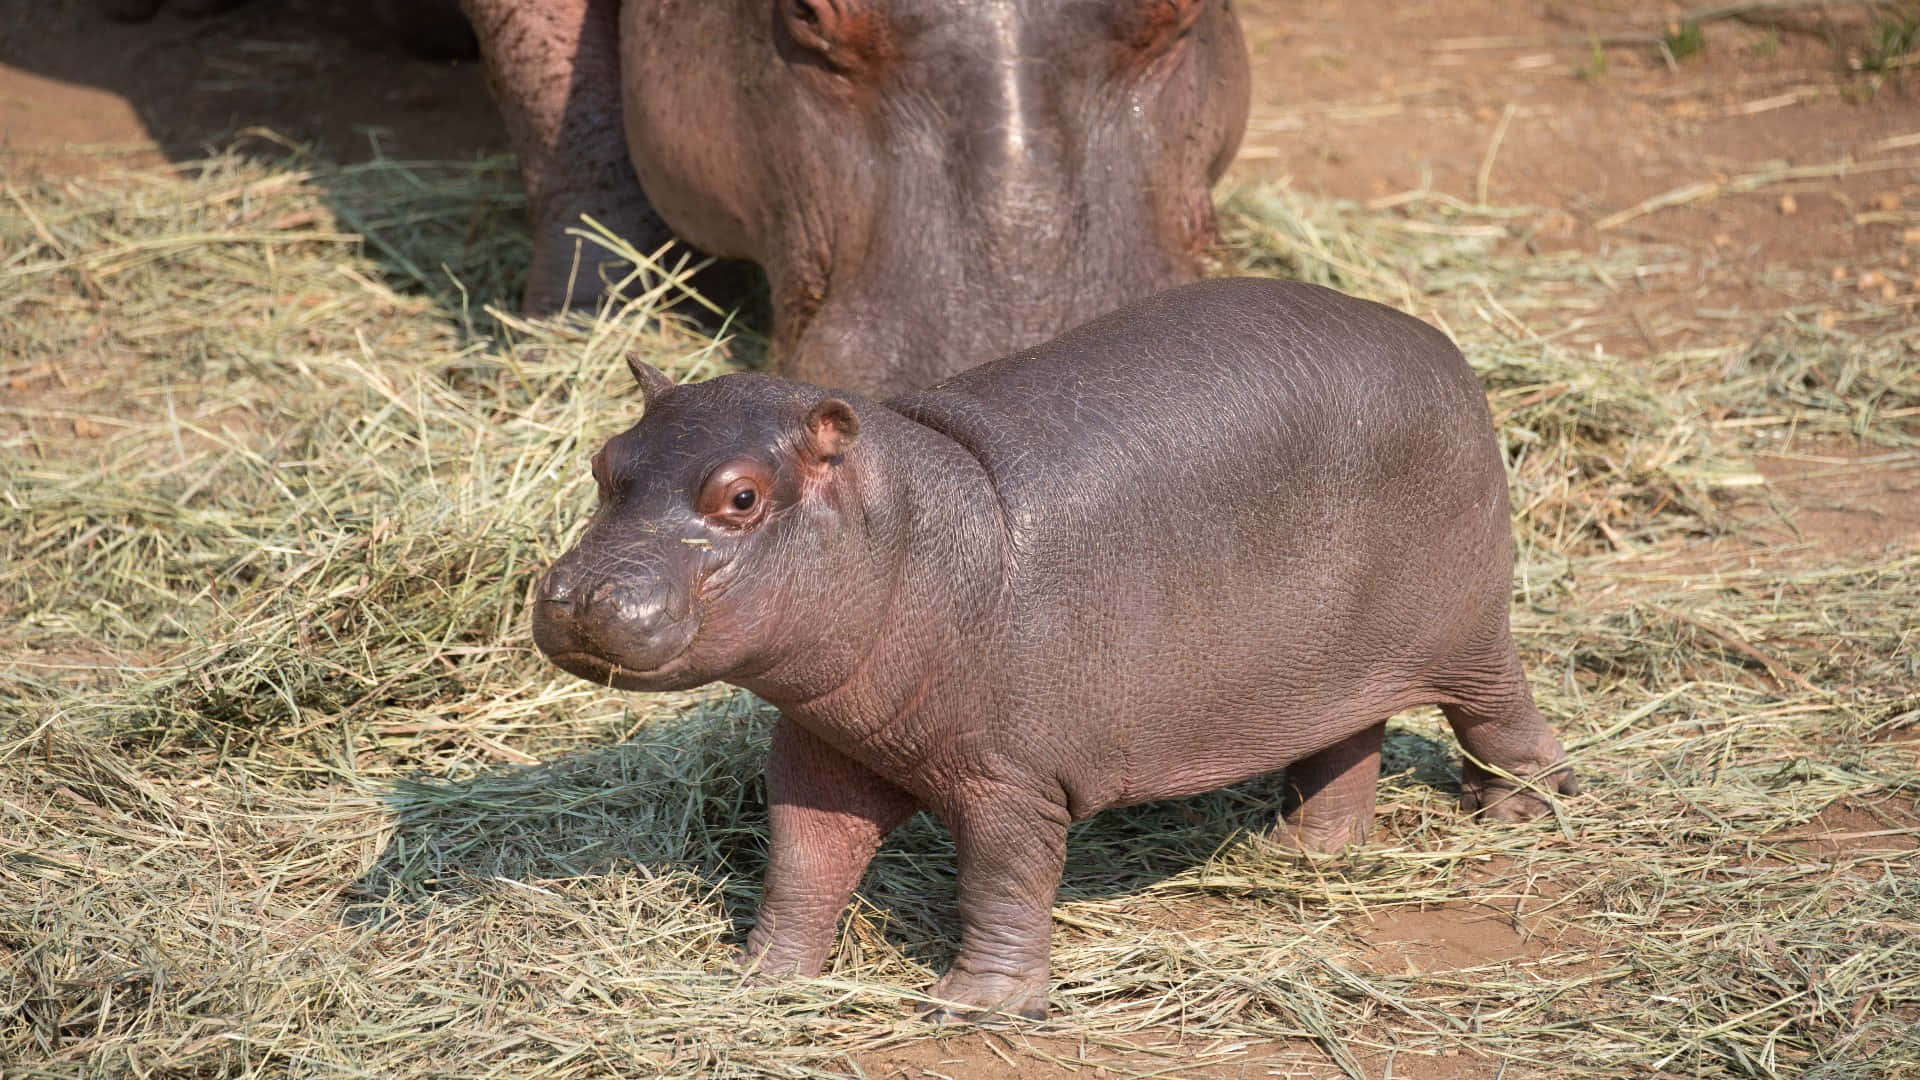 Look at this cute and peaceful hippo!